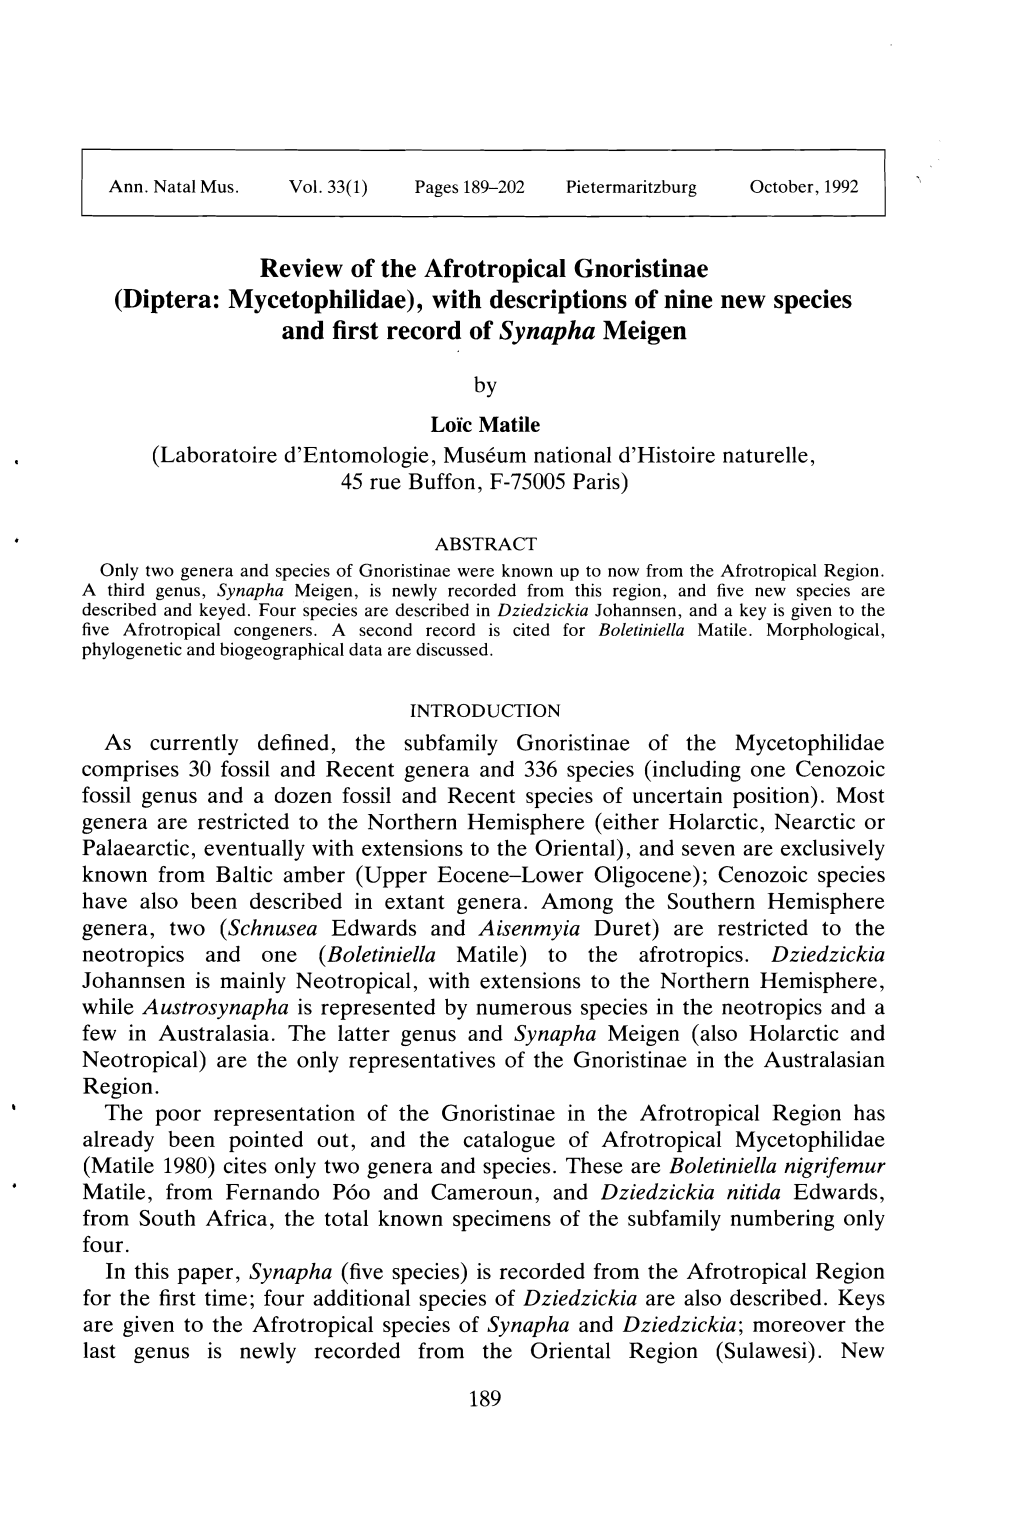 Review of the Afrotropical Gnoristinae (Diptera: Mycetophilidae), with Descriptions of Nine New Species and First Record of Synapha Meigen